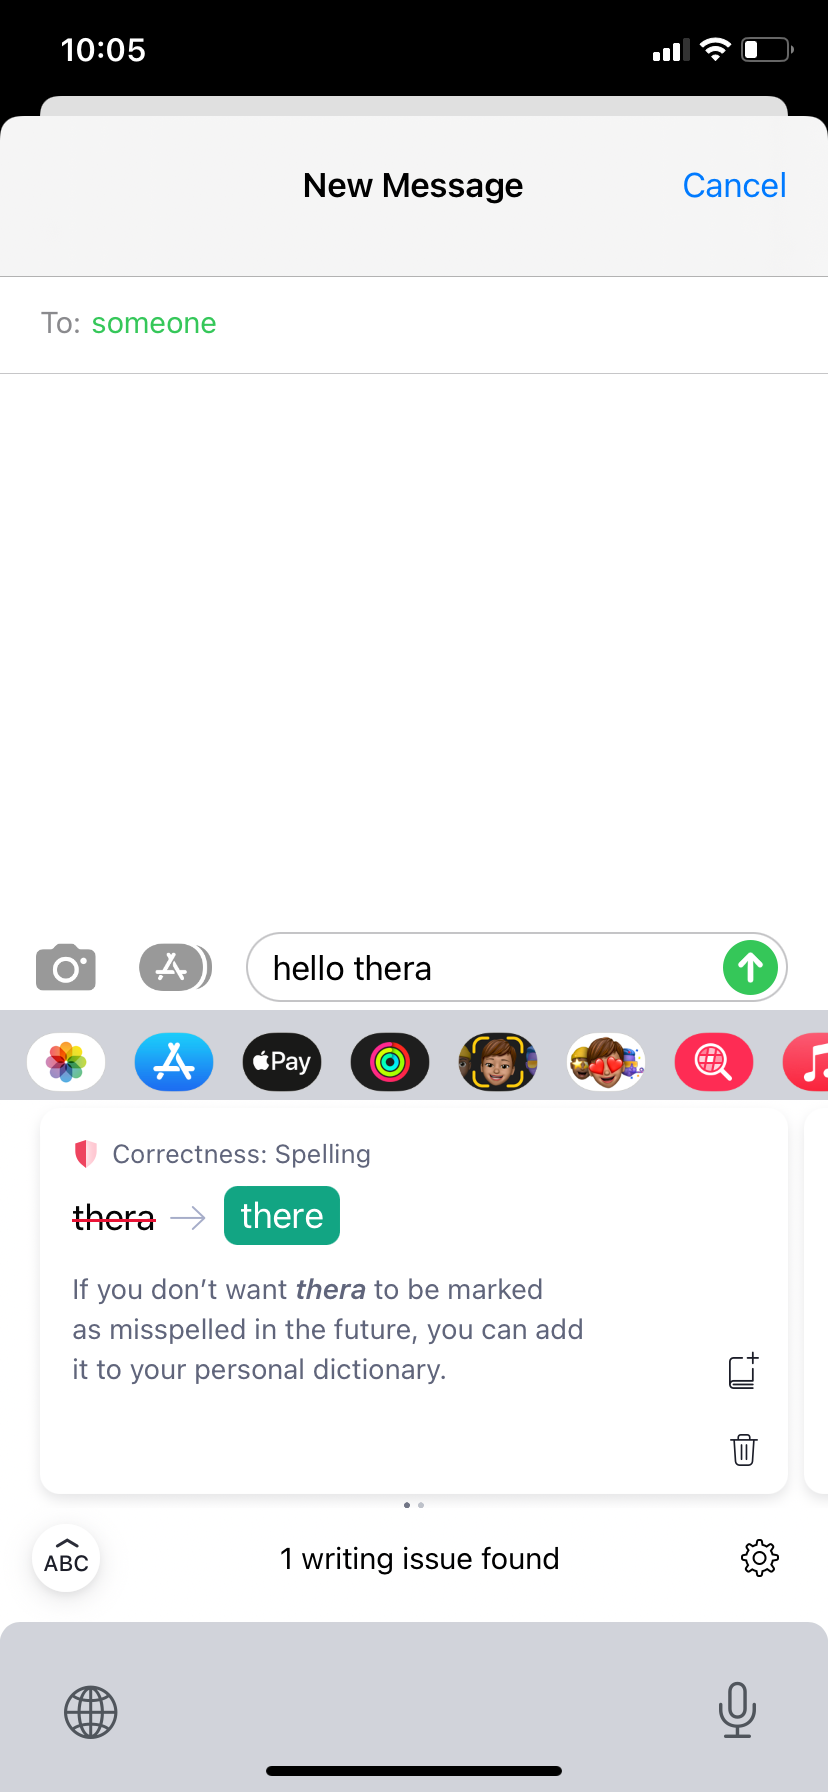 Image shows a grammar check using Grammarly Keyboard on iPhone